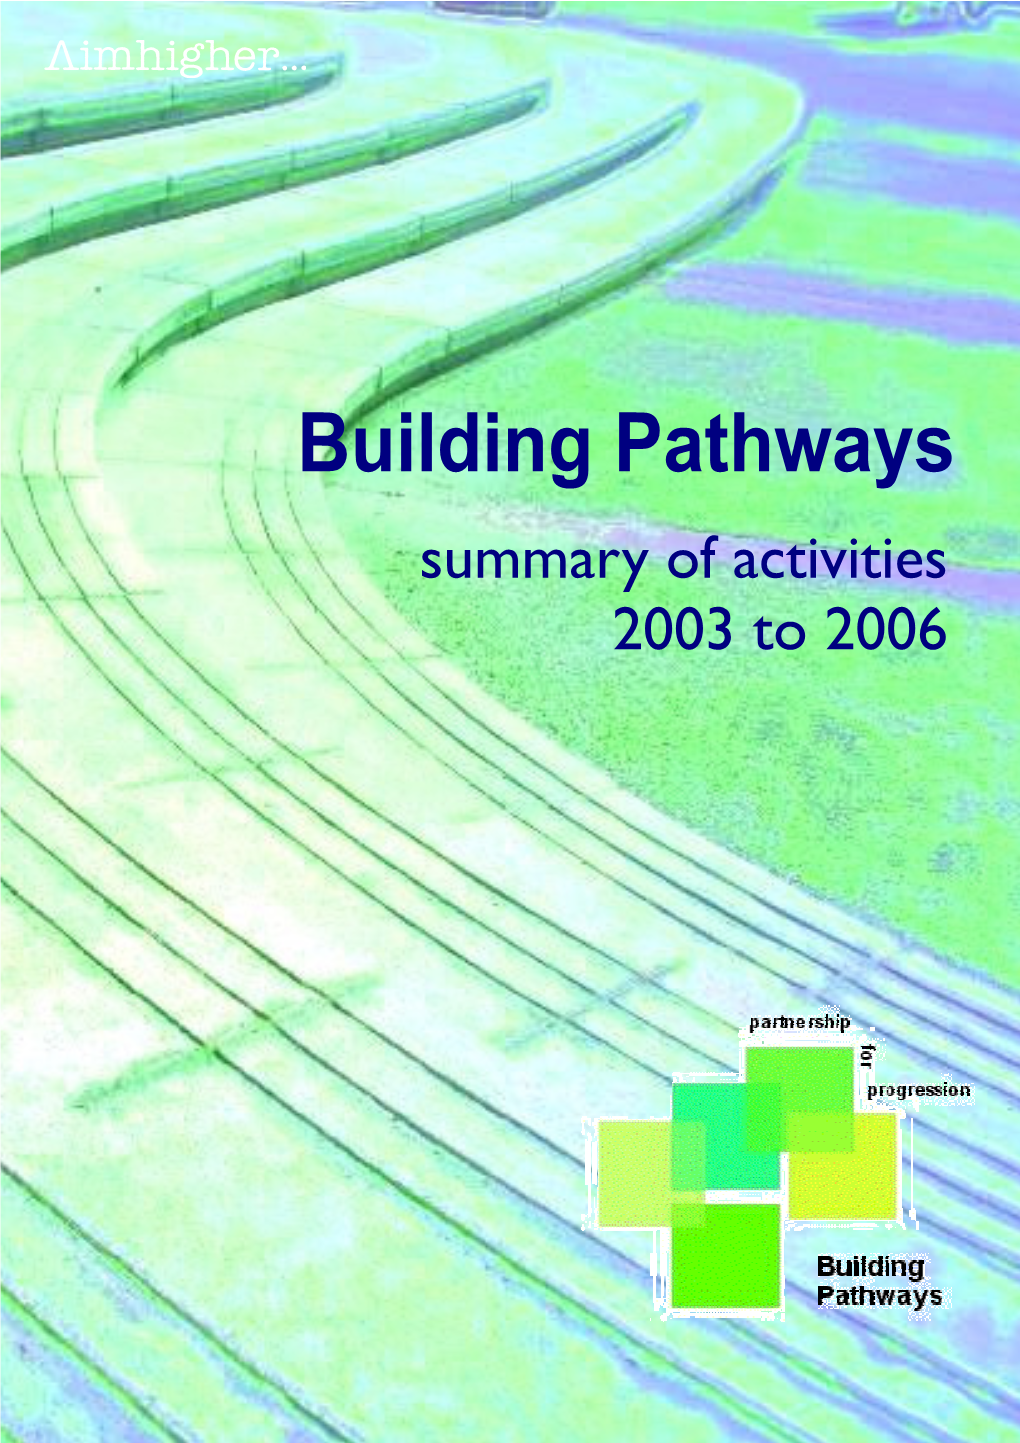 Summary of Activities 2003 to 2006 CONTENTS